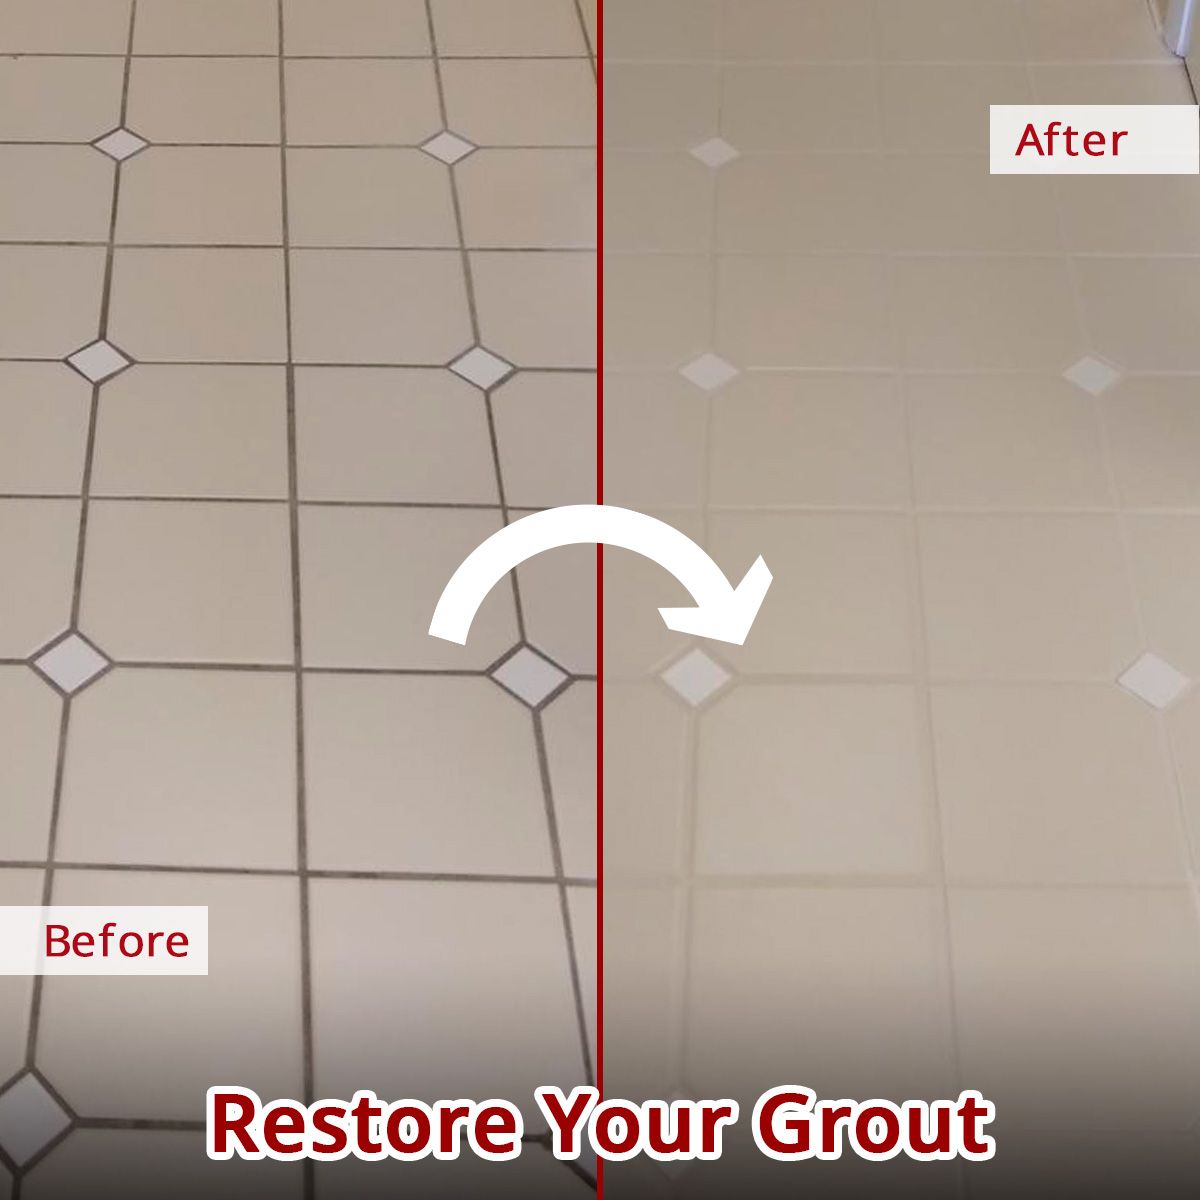 Restore Your Grout